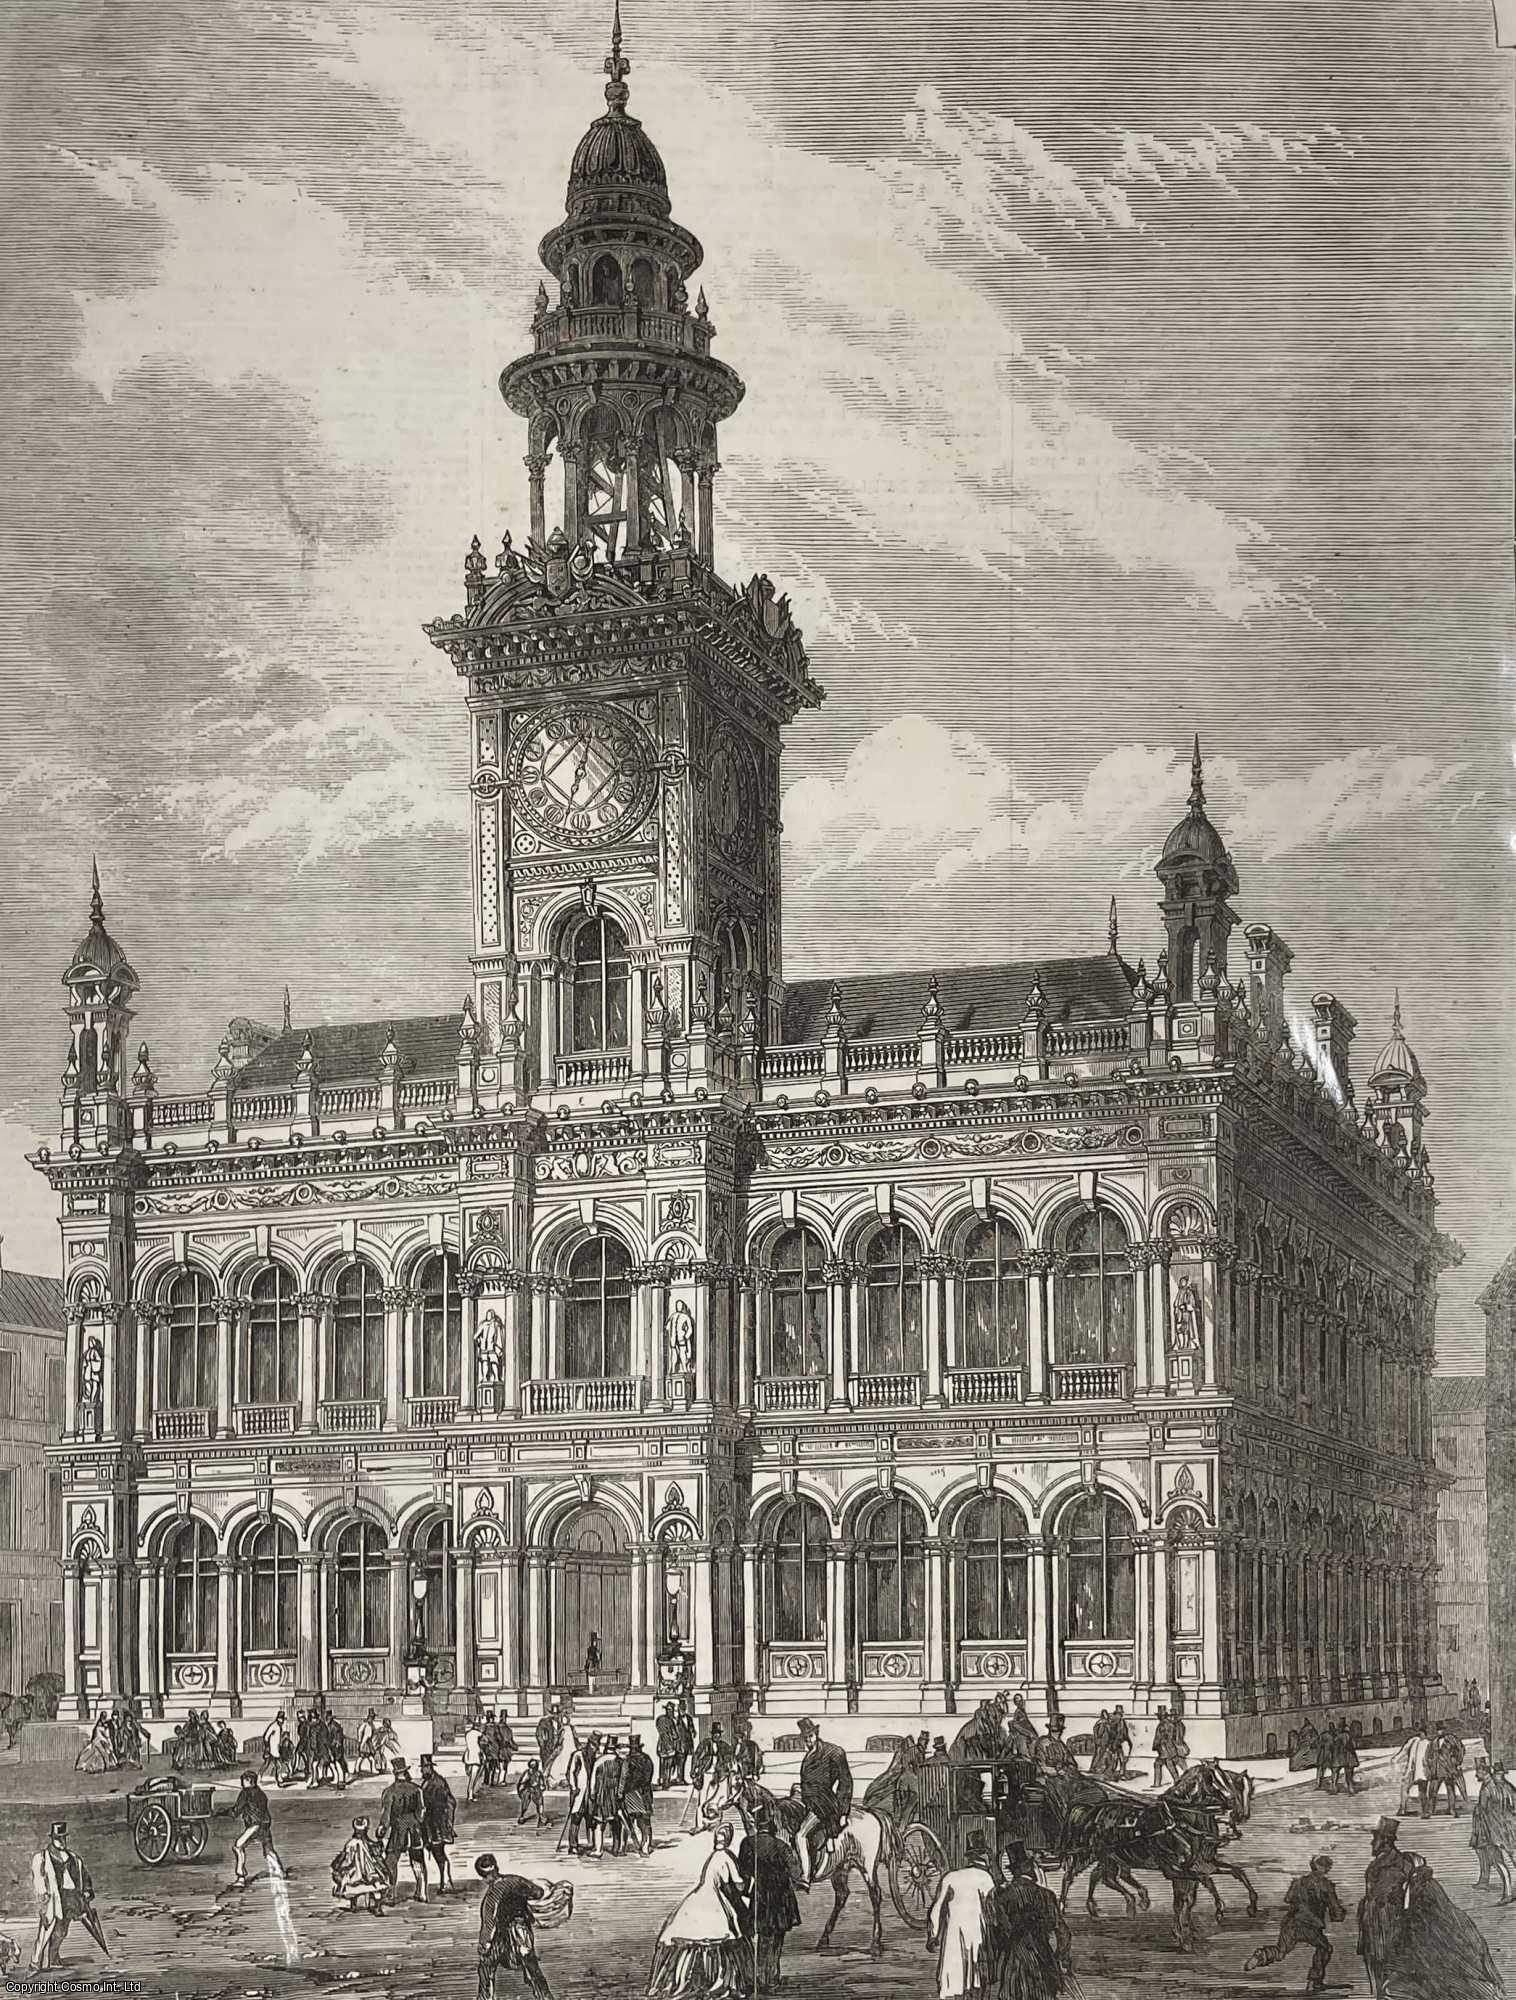 HULL - The New Town Hall at Hull. An original print from the Illustrated London News, 1866.